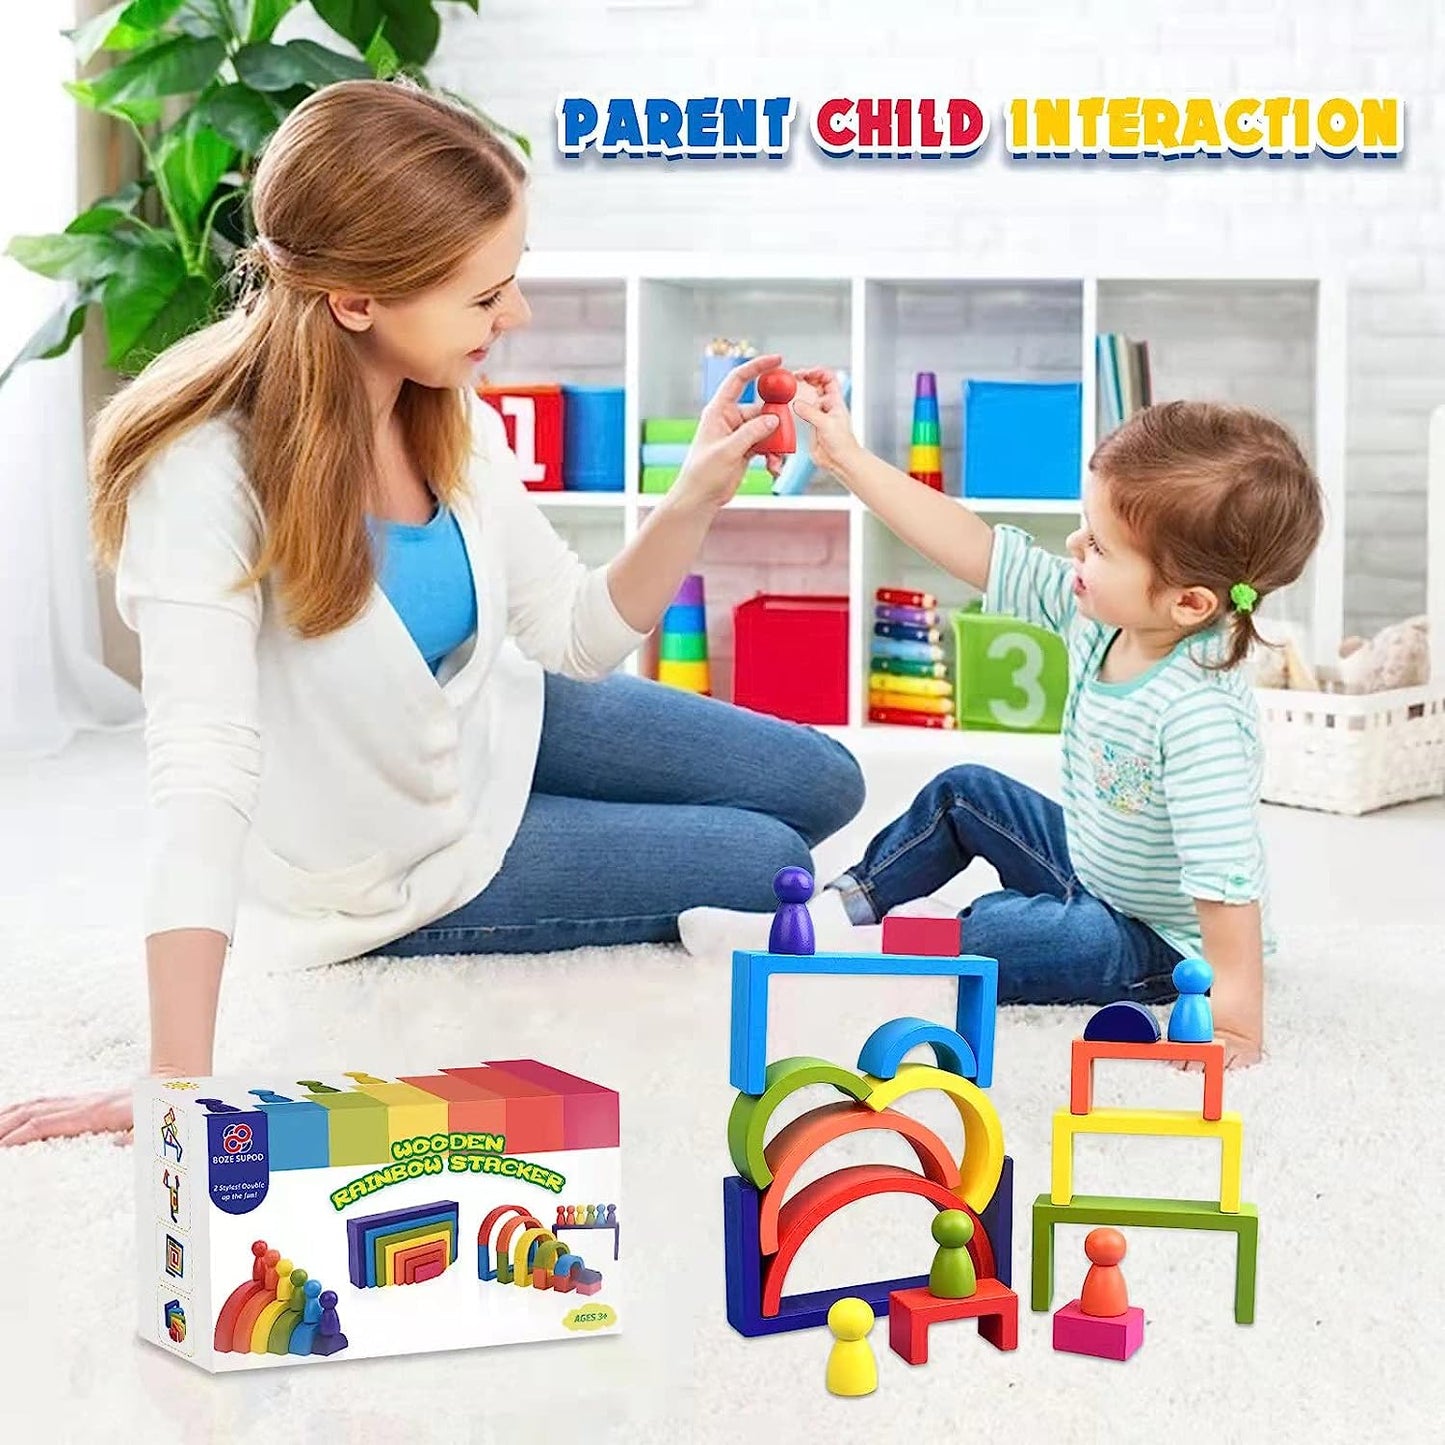 Wooden Toys Rainbow Stacking Blocks- Toys Building Blocks for Toddler Age 1 2 3 4 Years Old Open Ended Preschool Activity Educational Toy Gifts for Kids-19PCS